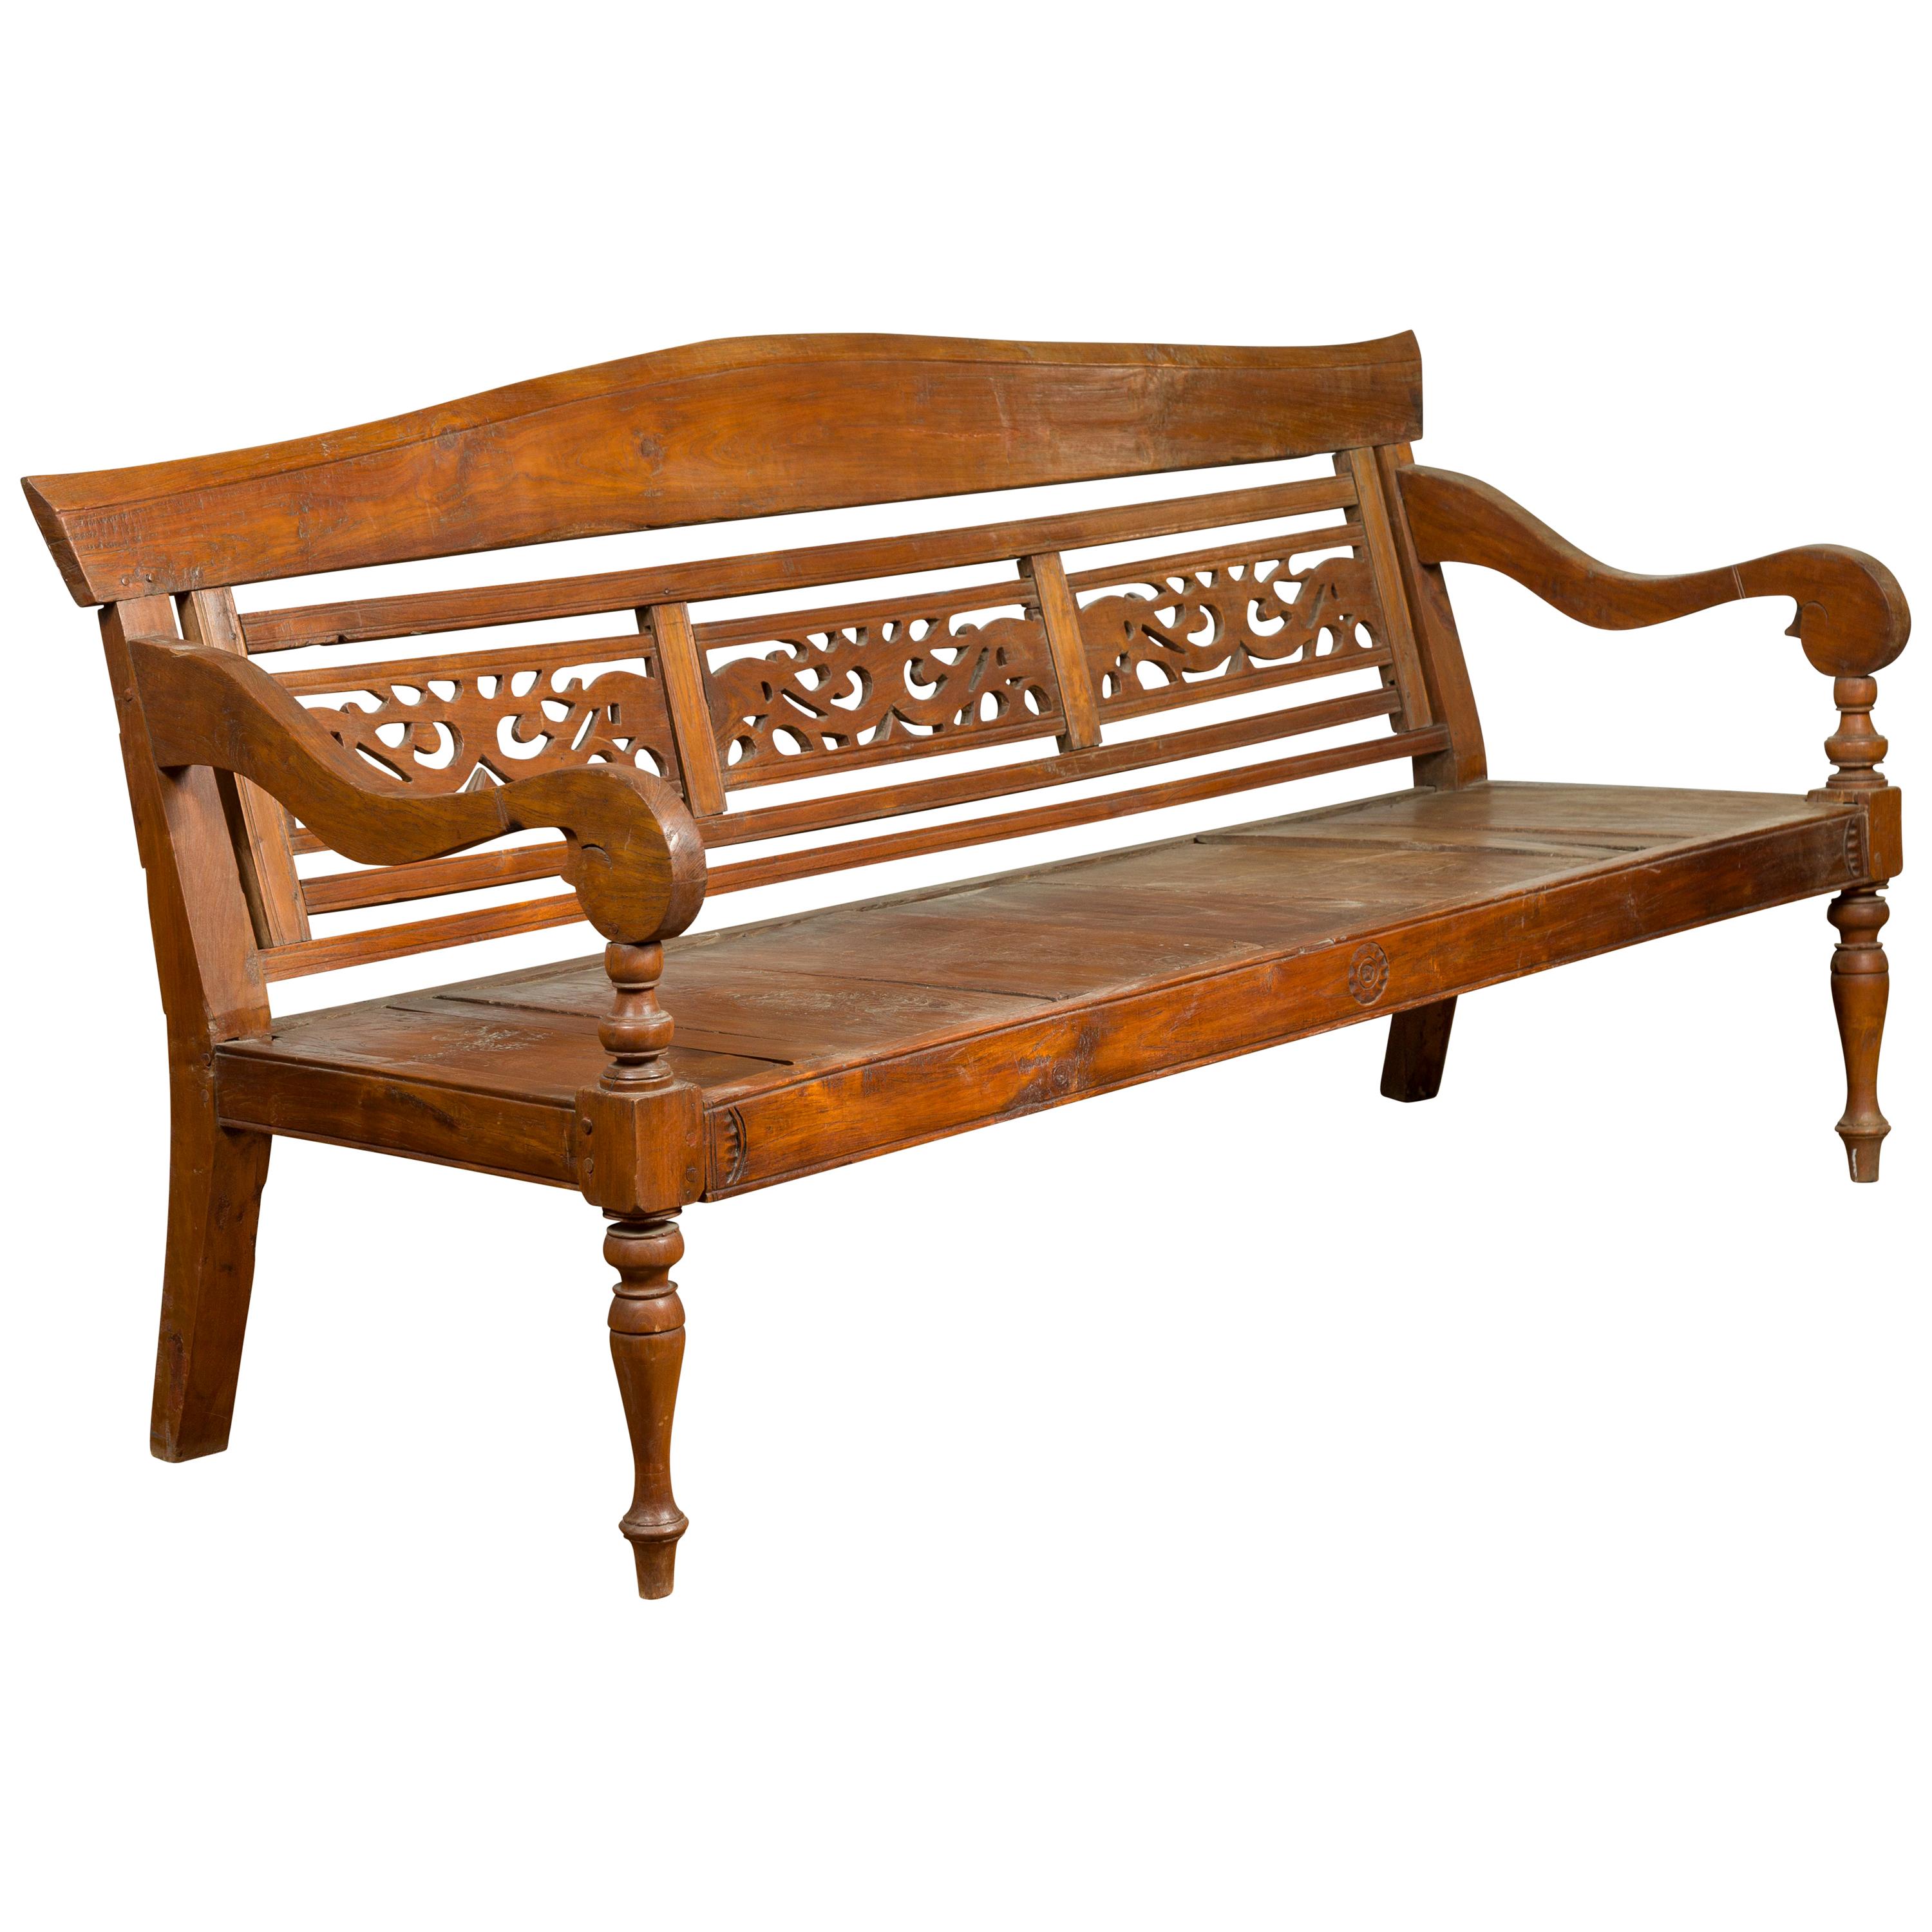 Dutch Colonial Antique Wooden Bench with Carved Camelback and Scrolling Arms